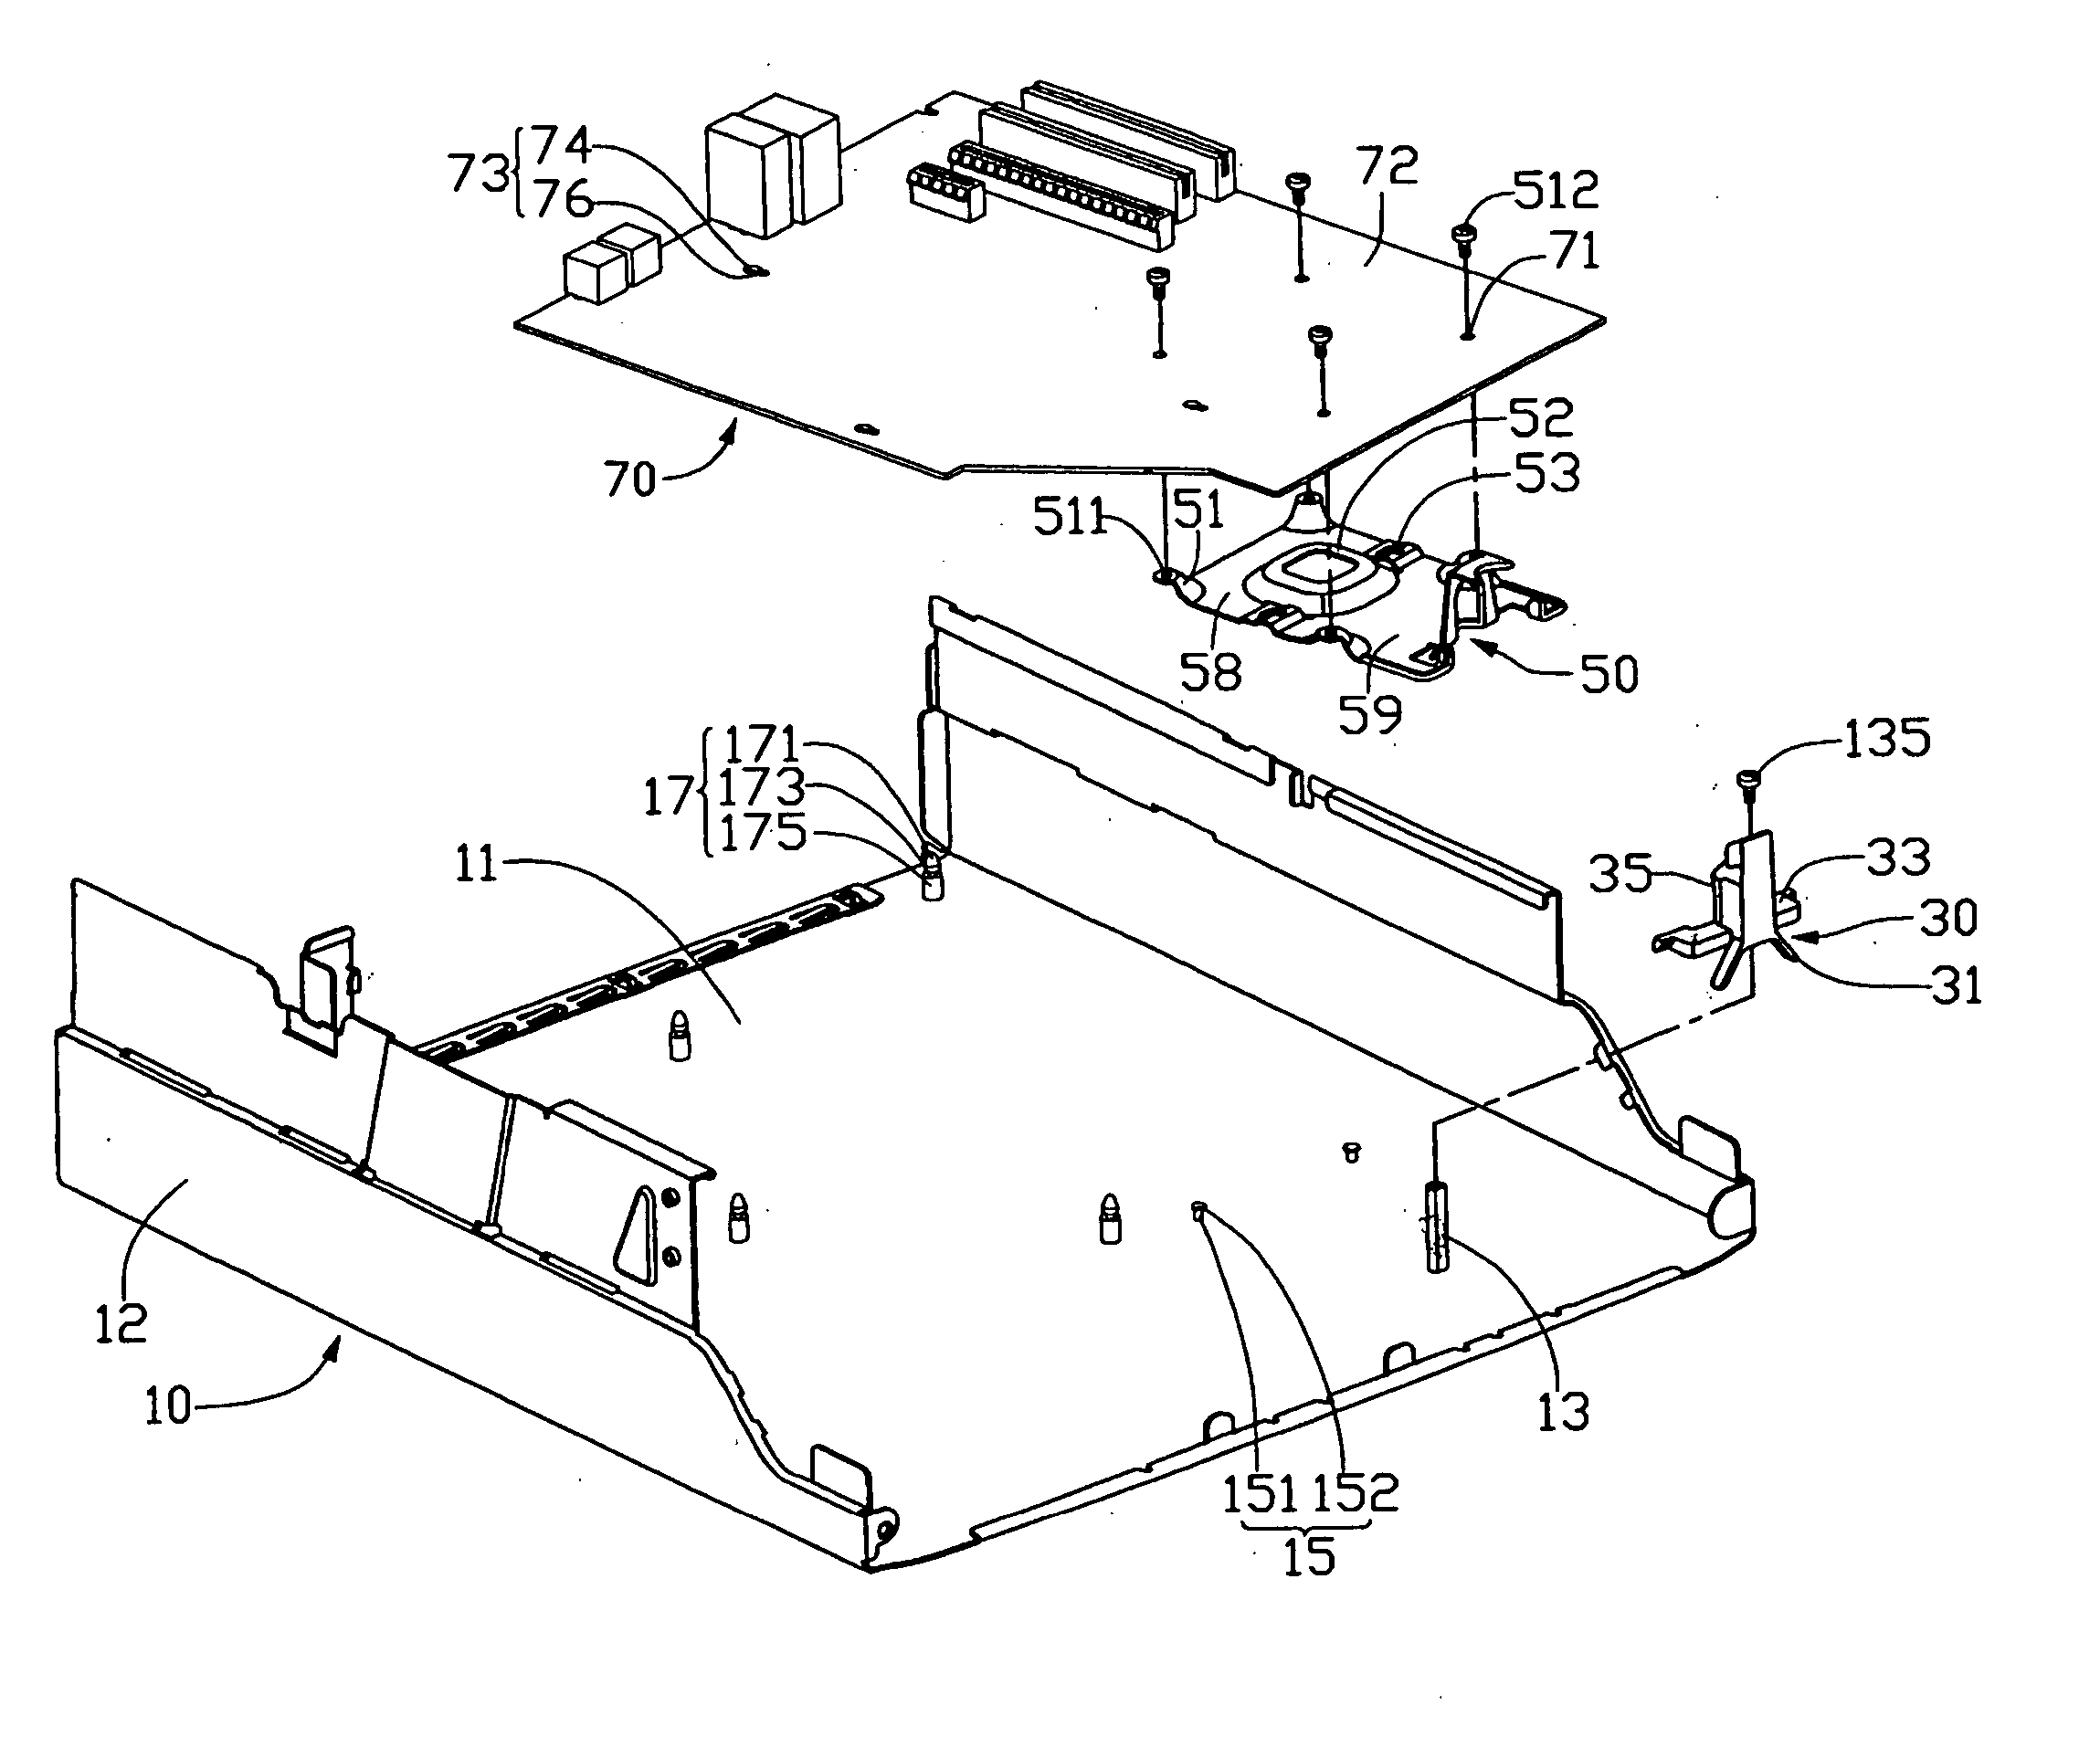 Mounting apparatus for circuit boards